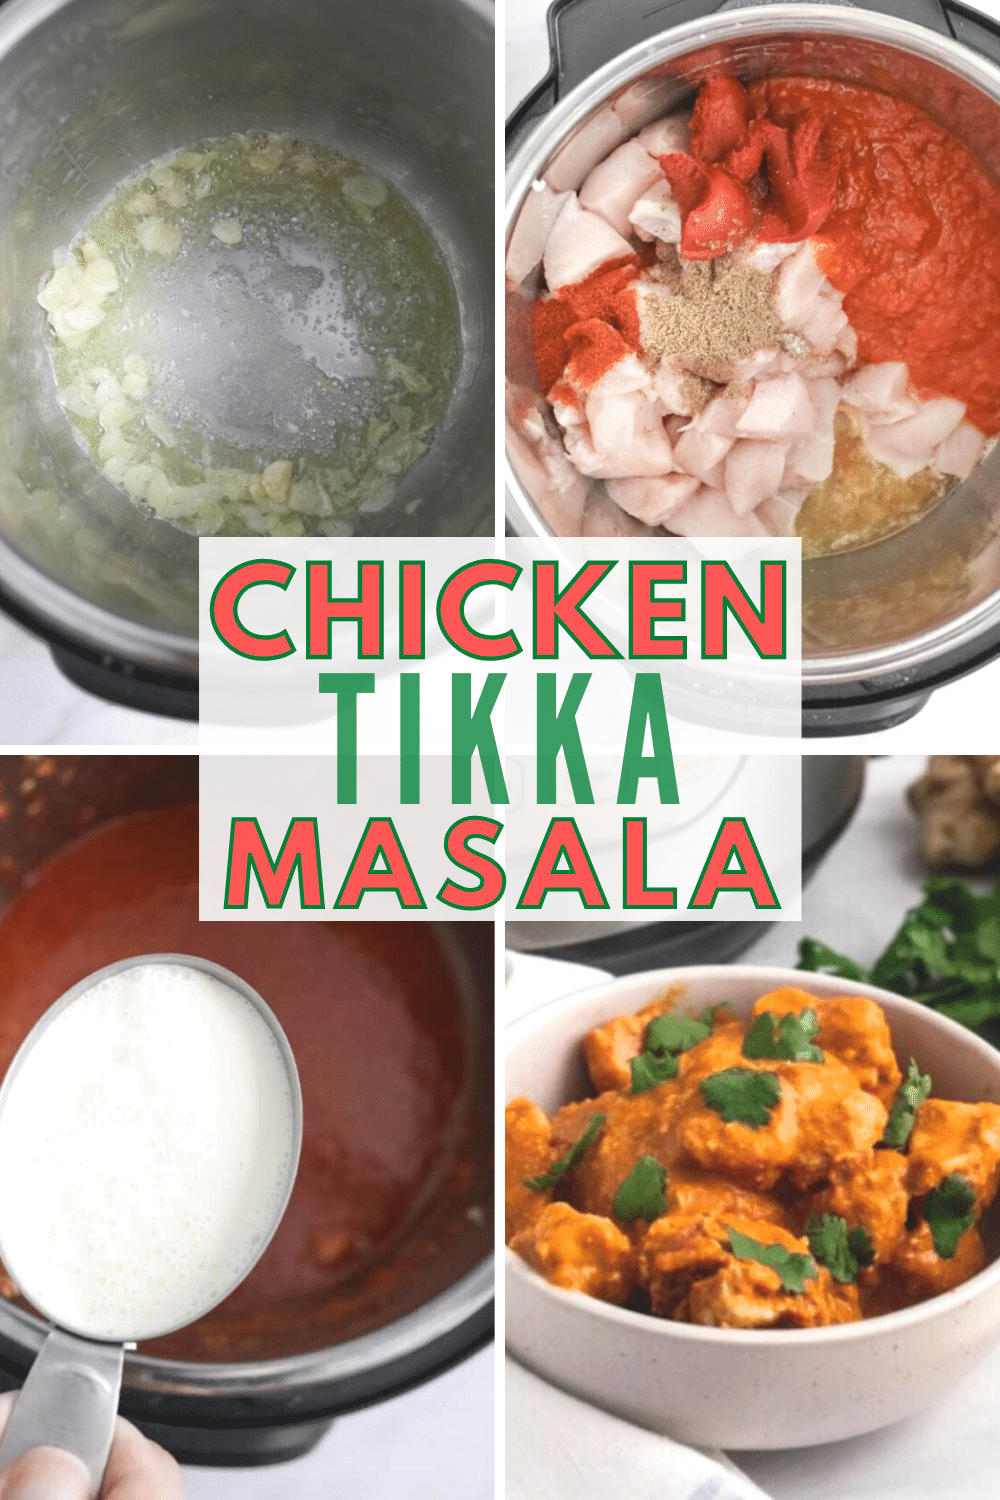 Instant pot Chicken Tikka Masala is a rich, spicy, and creamy Indian recipe of boneless chicken! Tasting as good as the dish served in restaurants, you'll be licking your fingers and going back for seconds! via @wondermomwannab